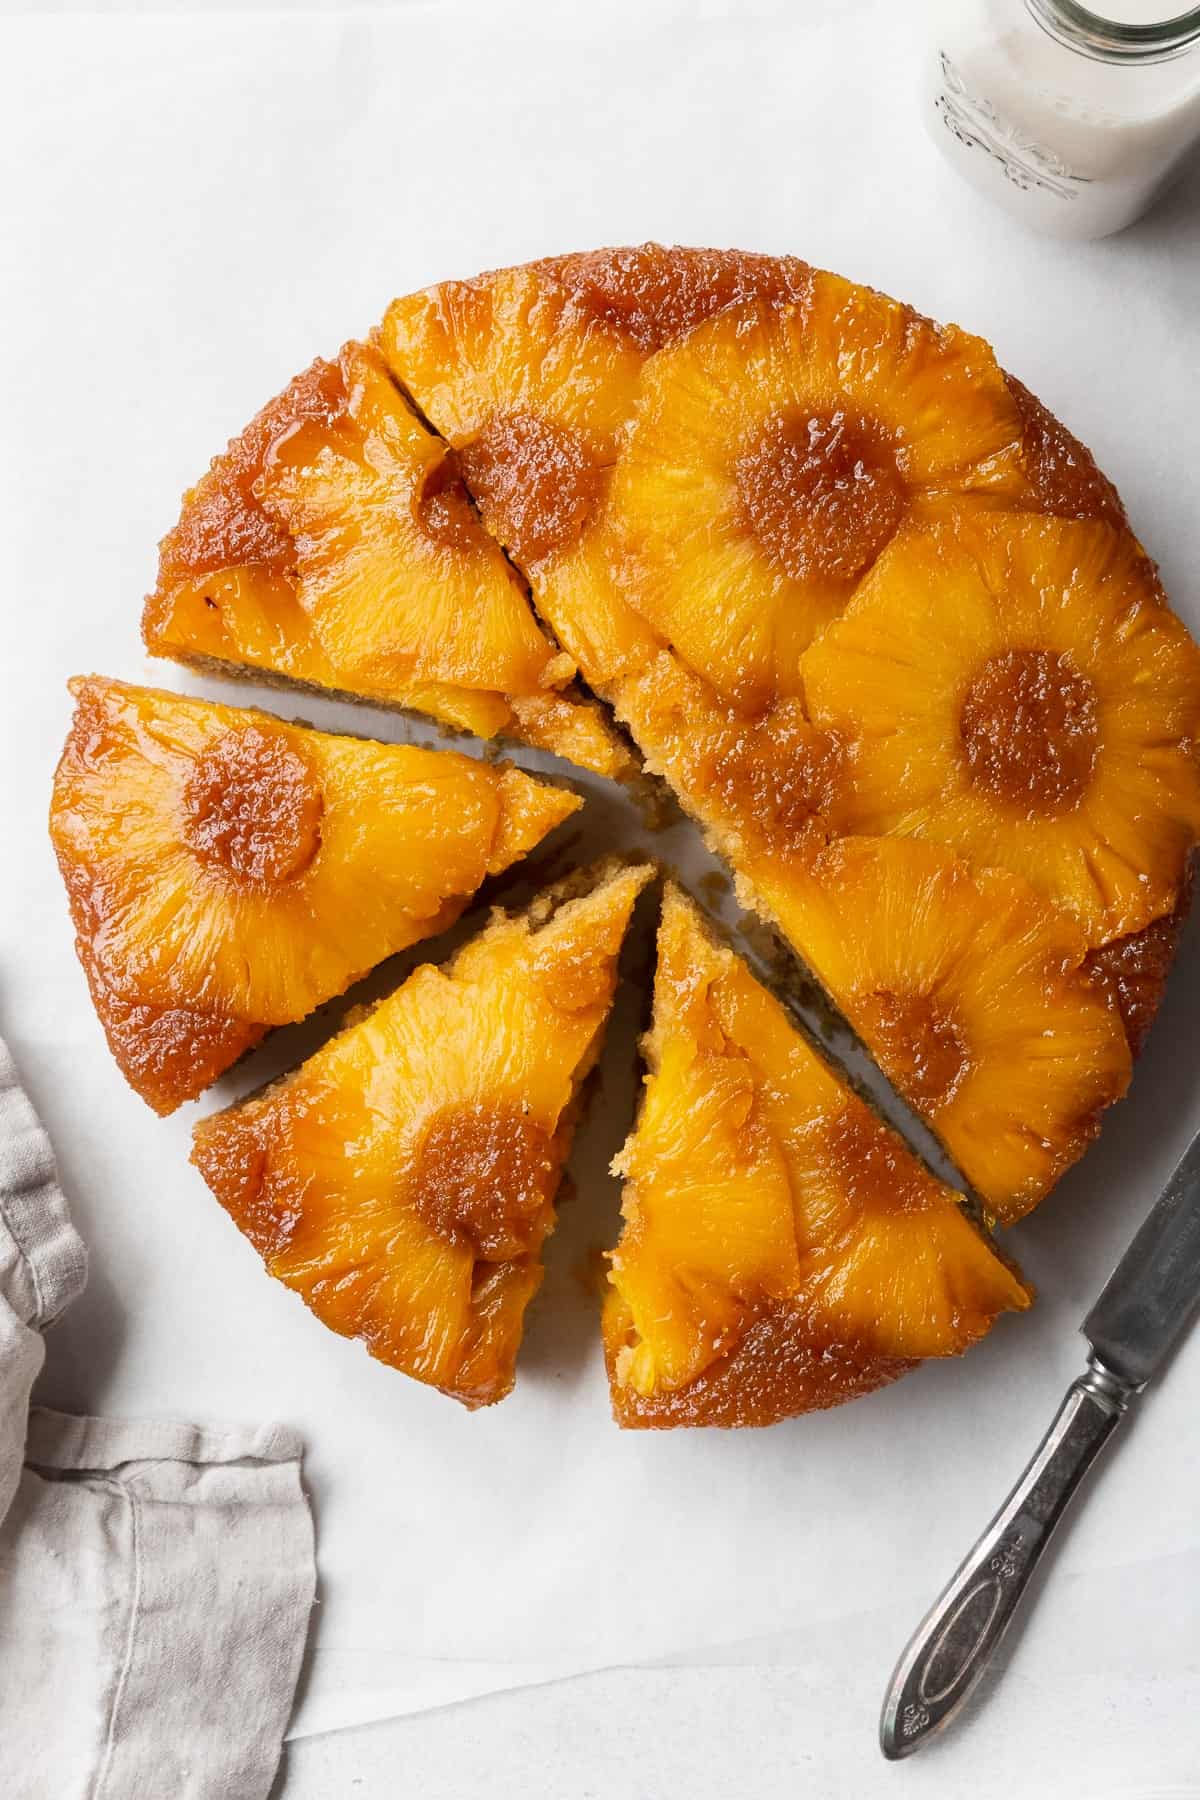 Sliced gluten-free pineapple upside down cake on the counter with a napkin and knife.